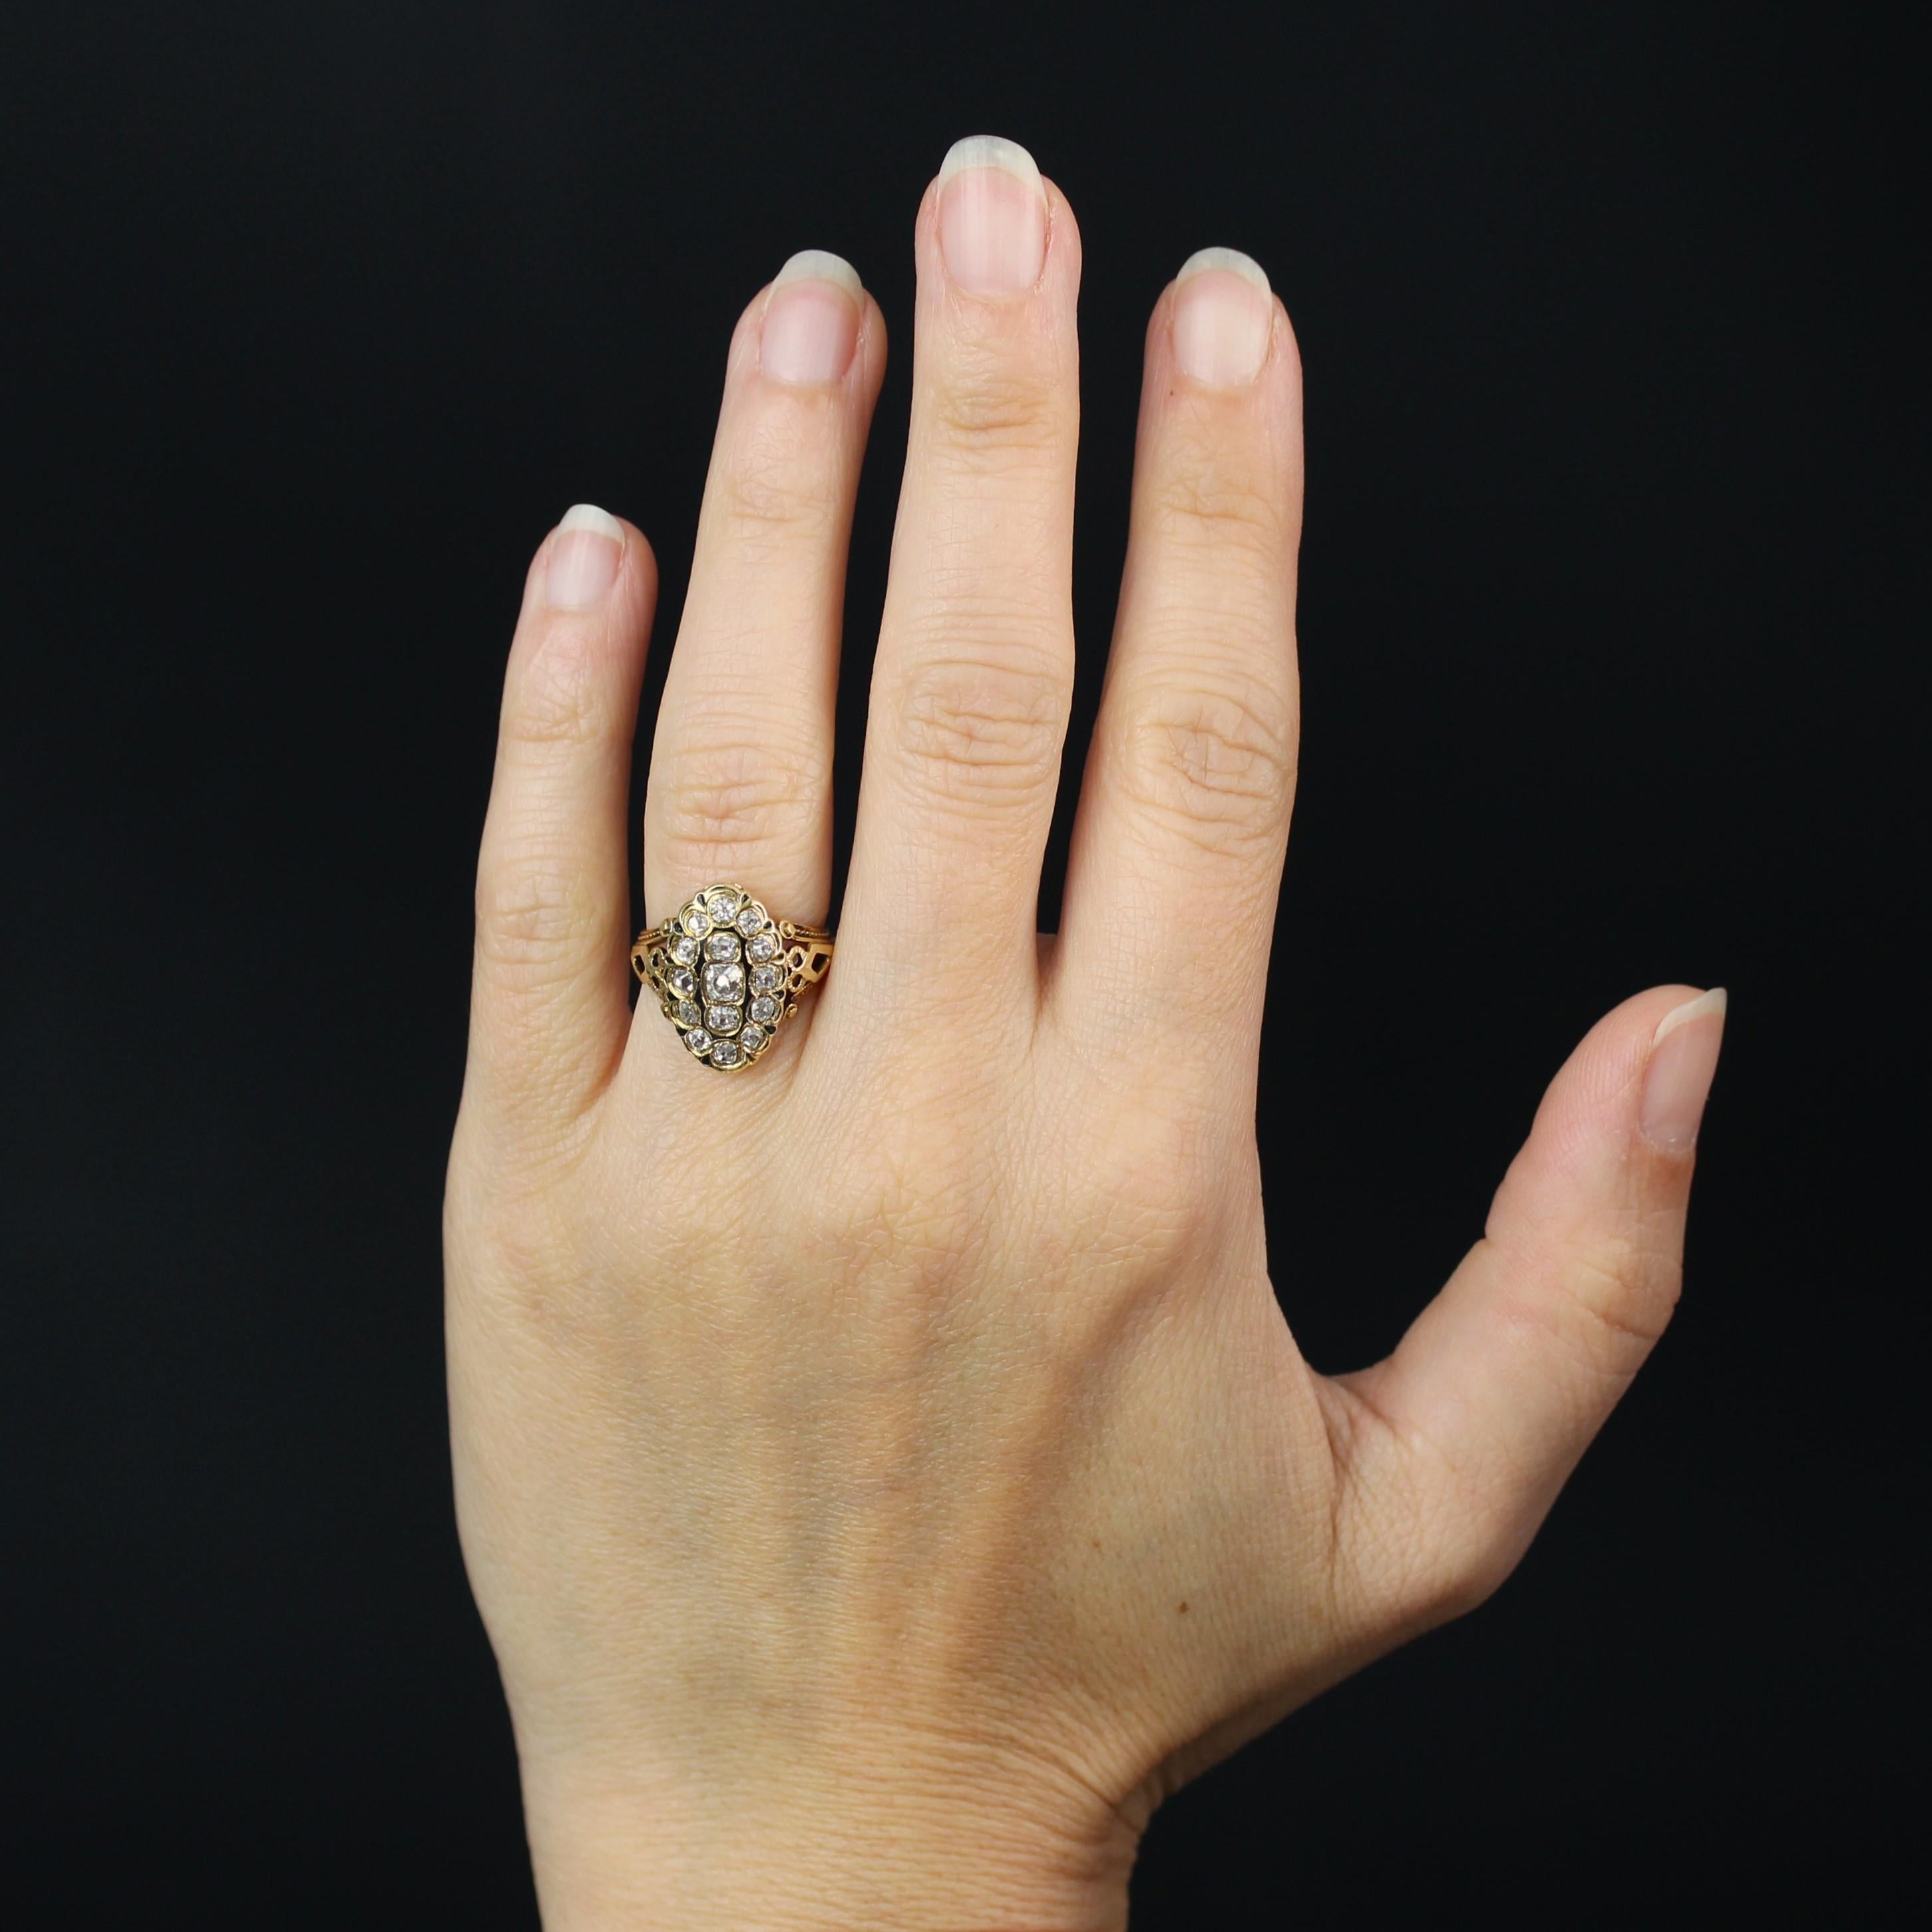 Ring in 18 karat yellow gold.
A delightful vintage ring, the top of which is set with antique cushion-cut diamonds on black enamel. The start of the ring is wide, openwork and chased.
Total weight of the diamond : approximately 0.62 carat.
Height :